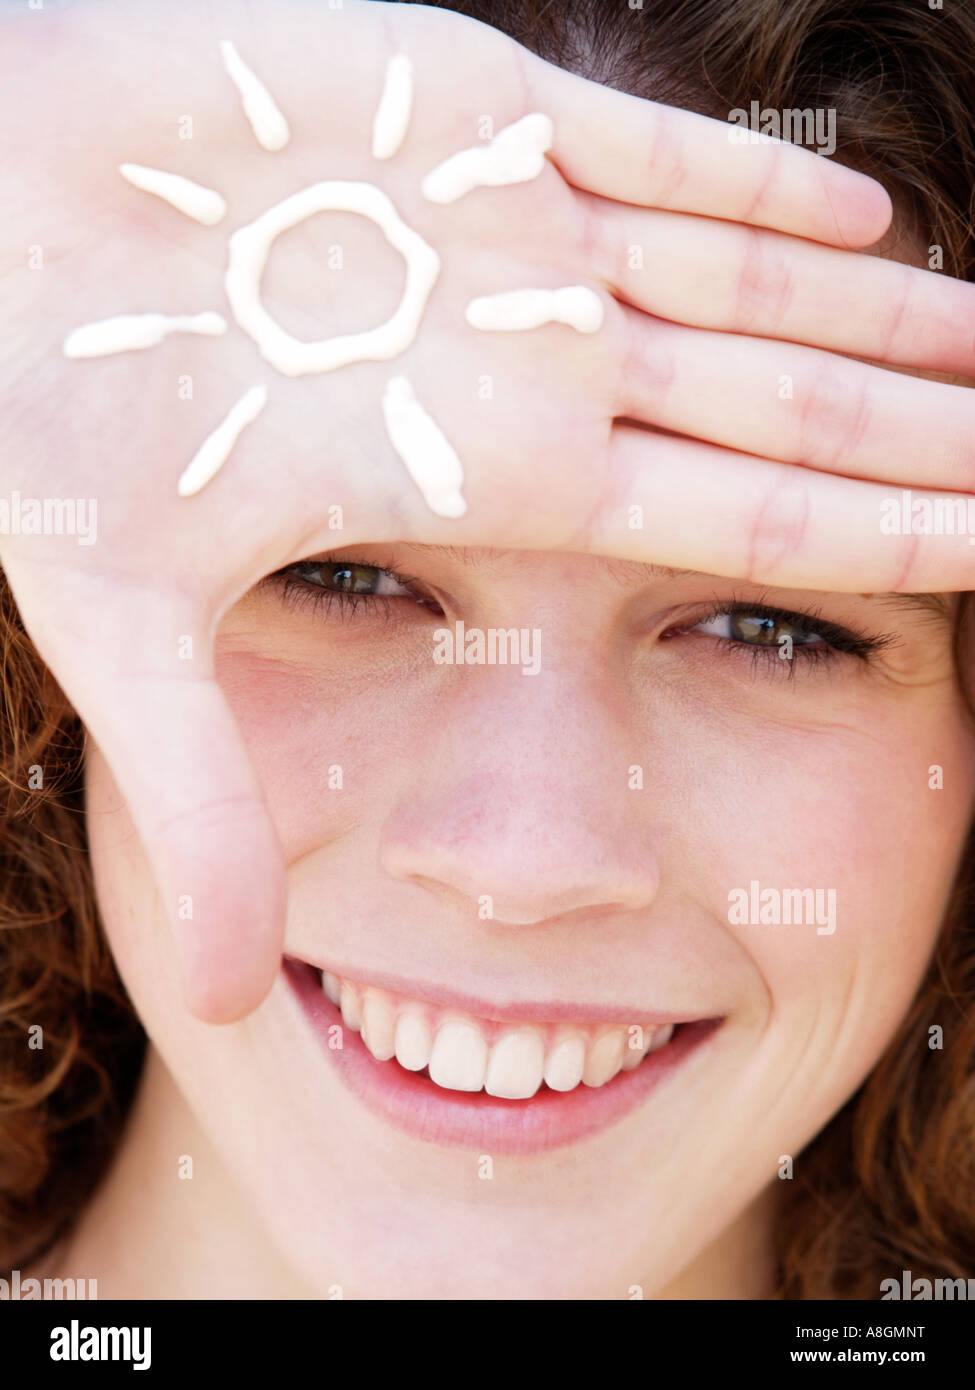 Teenage girl smiling with figure of a sun drawn in suncream on her hand Fair skin needs to be protected against uv radiation Stock Photo